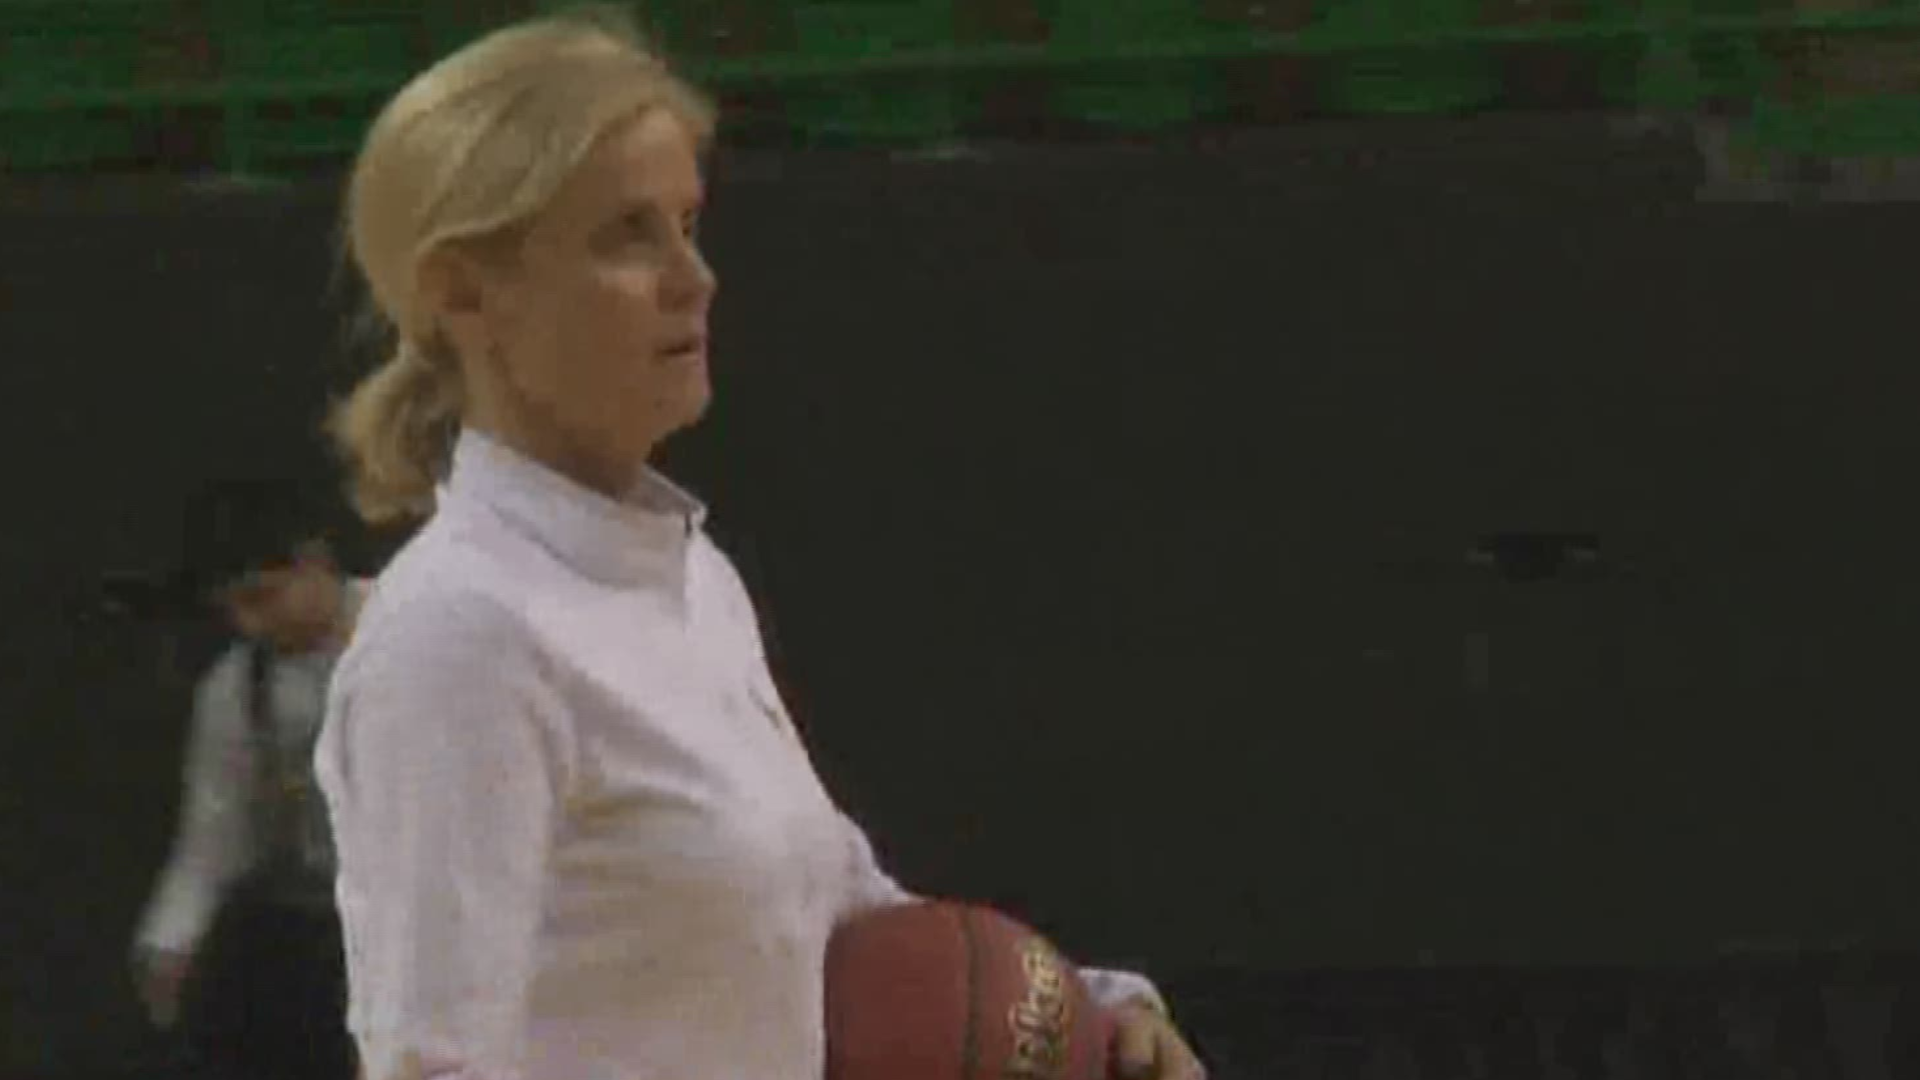 Kim Mulkey was disappointed when she learned the media wasn't as cultured as she originally believed.